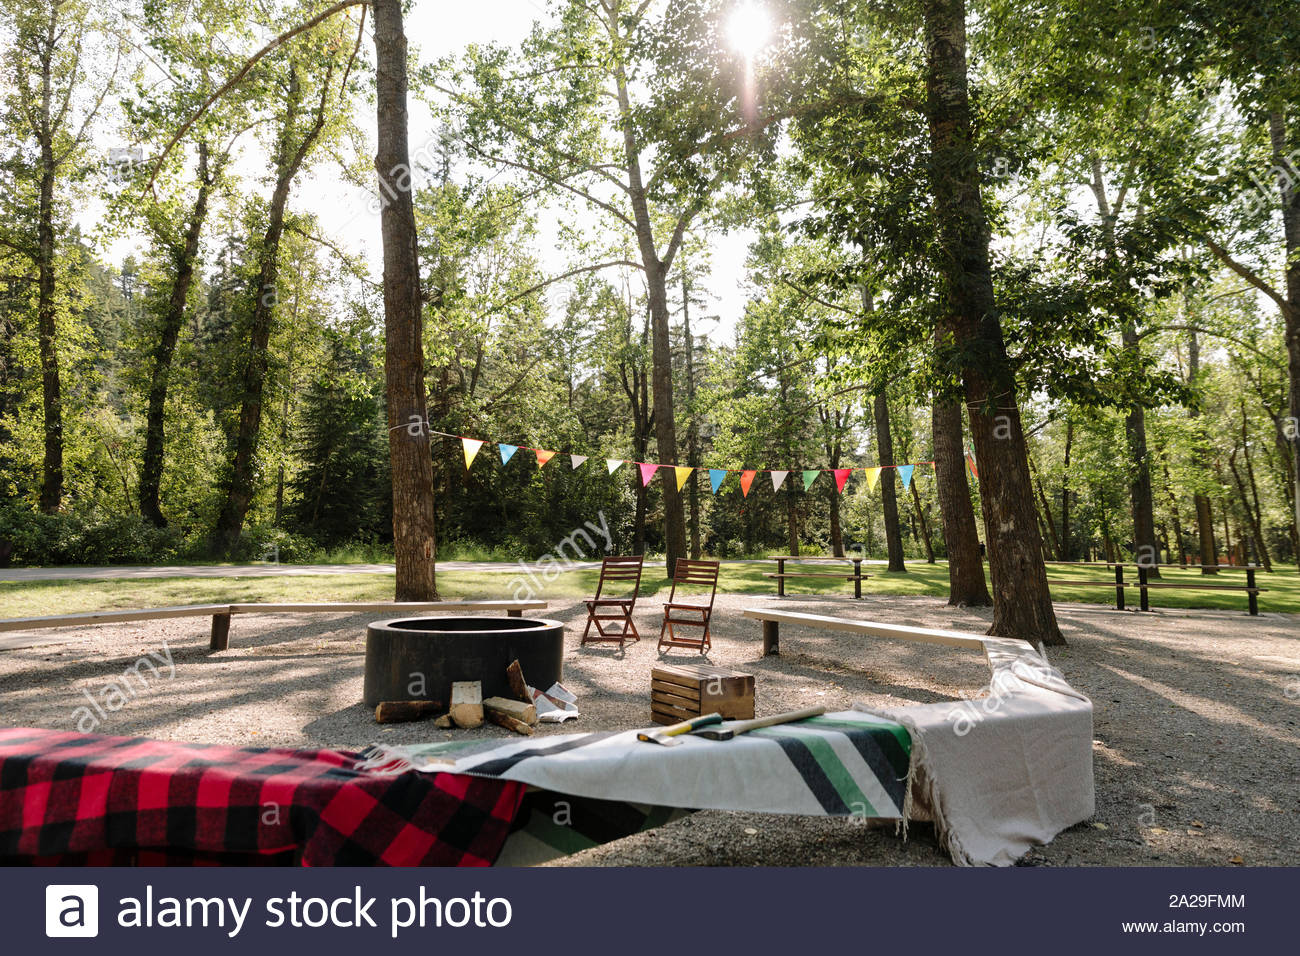 Picnic area with bunting in urban park Stock Photo